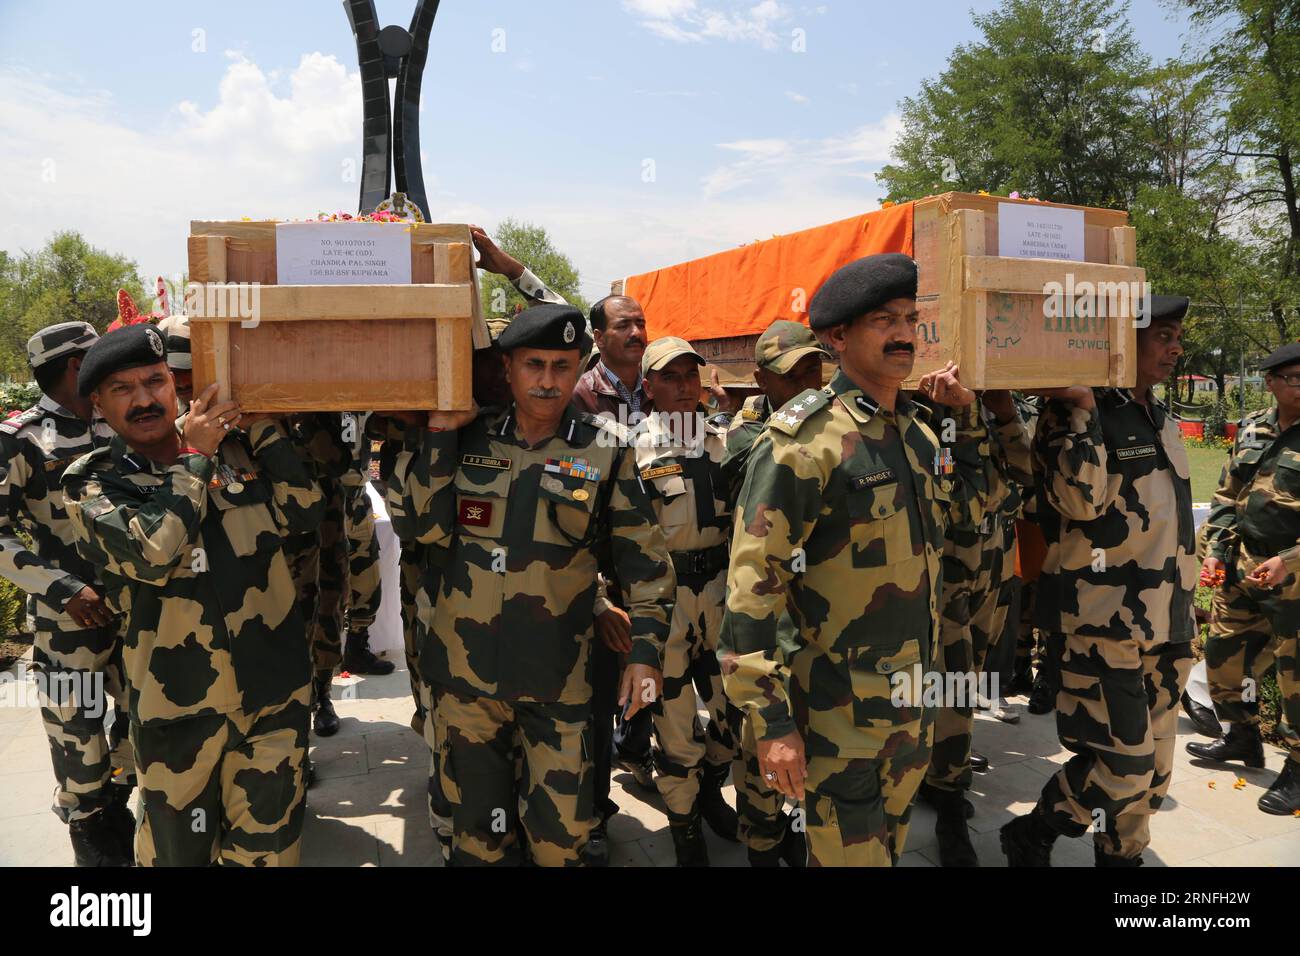 Indien - Beerdigung von Soldaten (160809) -- SRINAGAR, Aug. 9, 2016 -- India s Border Security Force officials carry the coffins of slain troopers during a wreath laying ceremony in Srinagar, summer capital of Indian-controlled Kashmir, on Aug. 9, 2016. Three Indian troops including a junior level officer and a militant were killed Monday in a fierce gunfight near the Line of Control (LoC), dividing Kashmir. ) (cyc) INDIAN-CONTROLLED KASHMIR-SRINAGAR-THREE BORDER GUARDS KILLED JavedxDar PUBLICATIONxNOTxINxCHN   India Funeral from Soldiers 160809 Srinagar Aug 9 2016 India S Border Security Forc Stock Photo